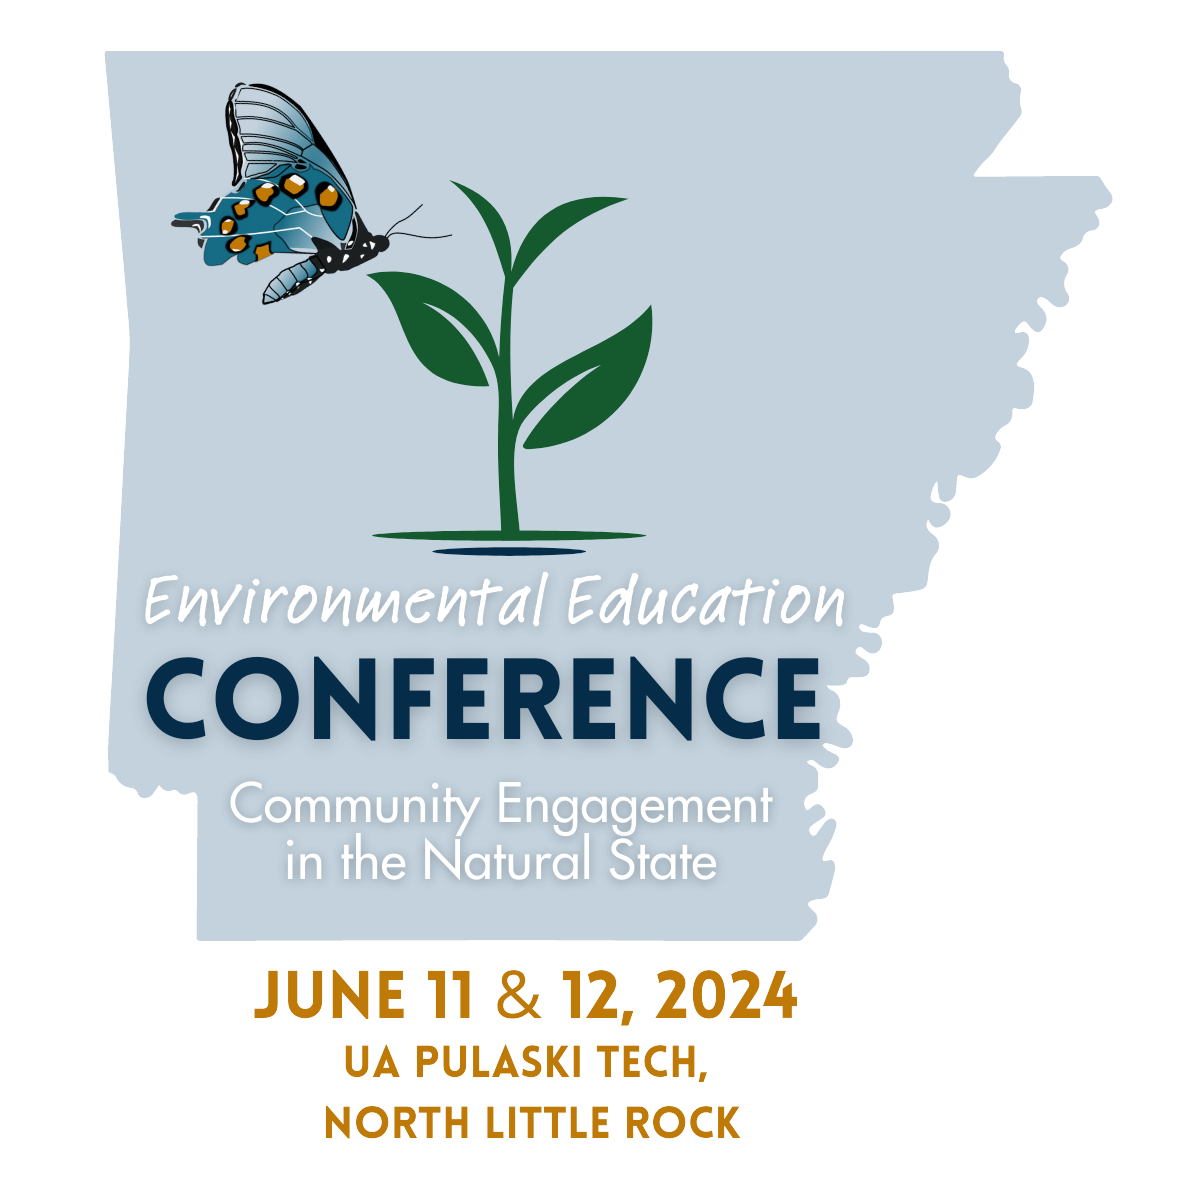 shape of Arkansas with butterfly and plant, conference title, and conference dates